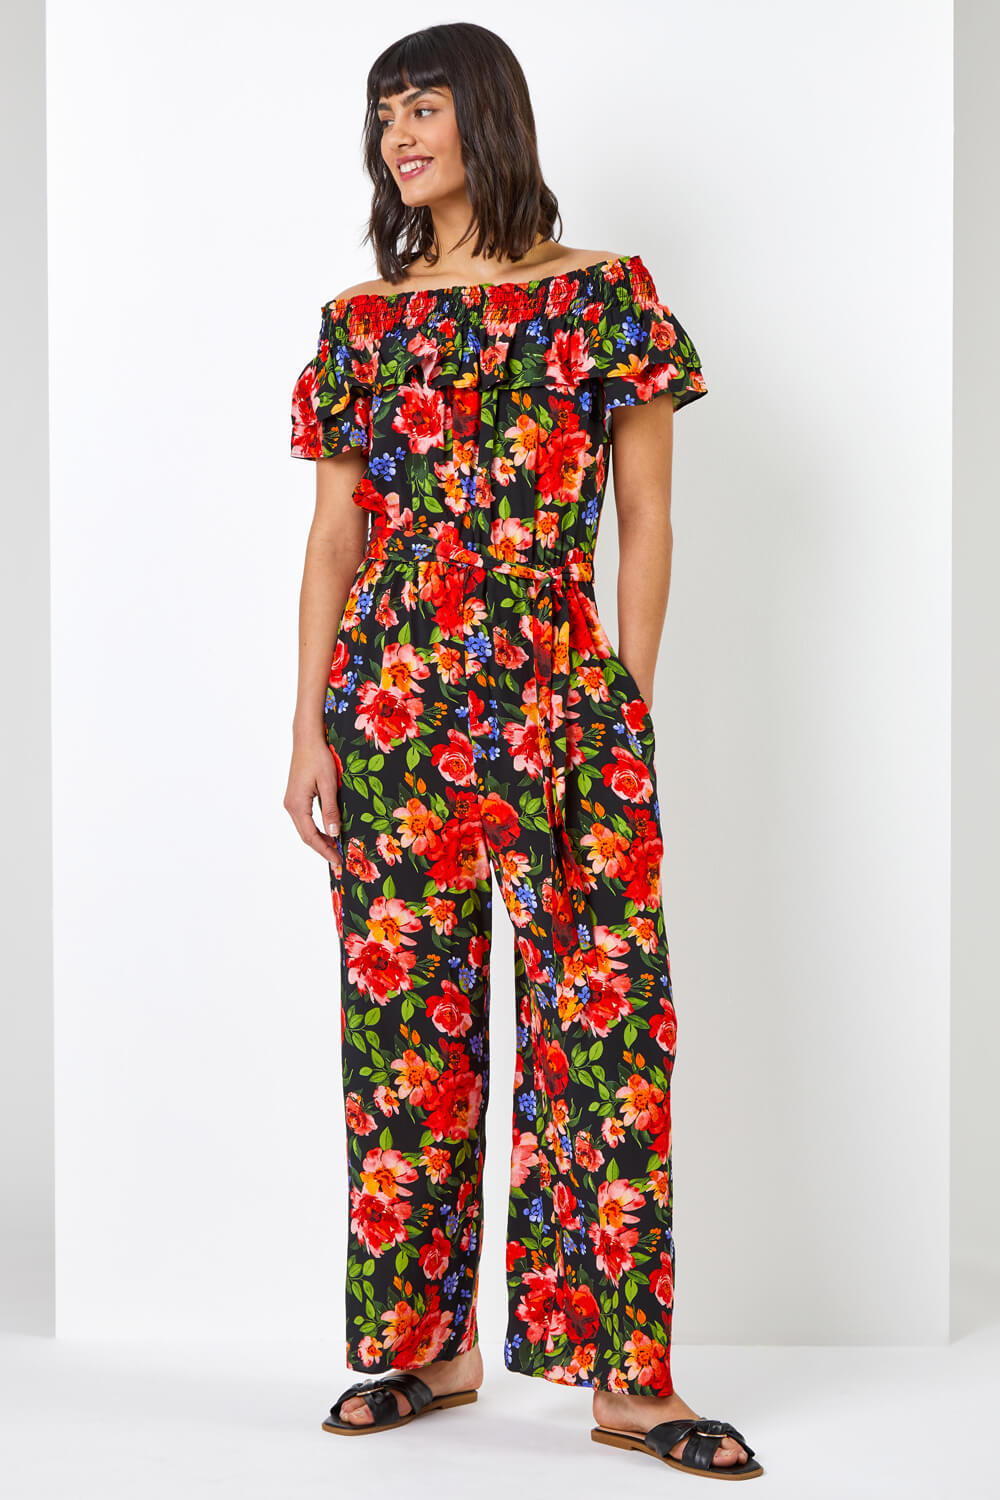 Red Floral Print Frill Neck Jumpsuit, Image 3 of 6